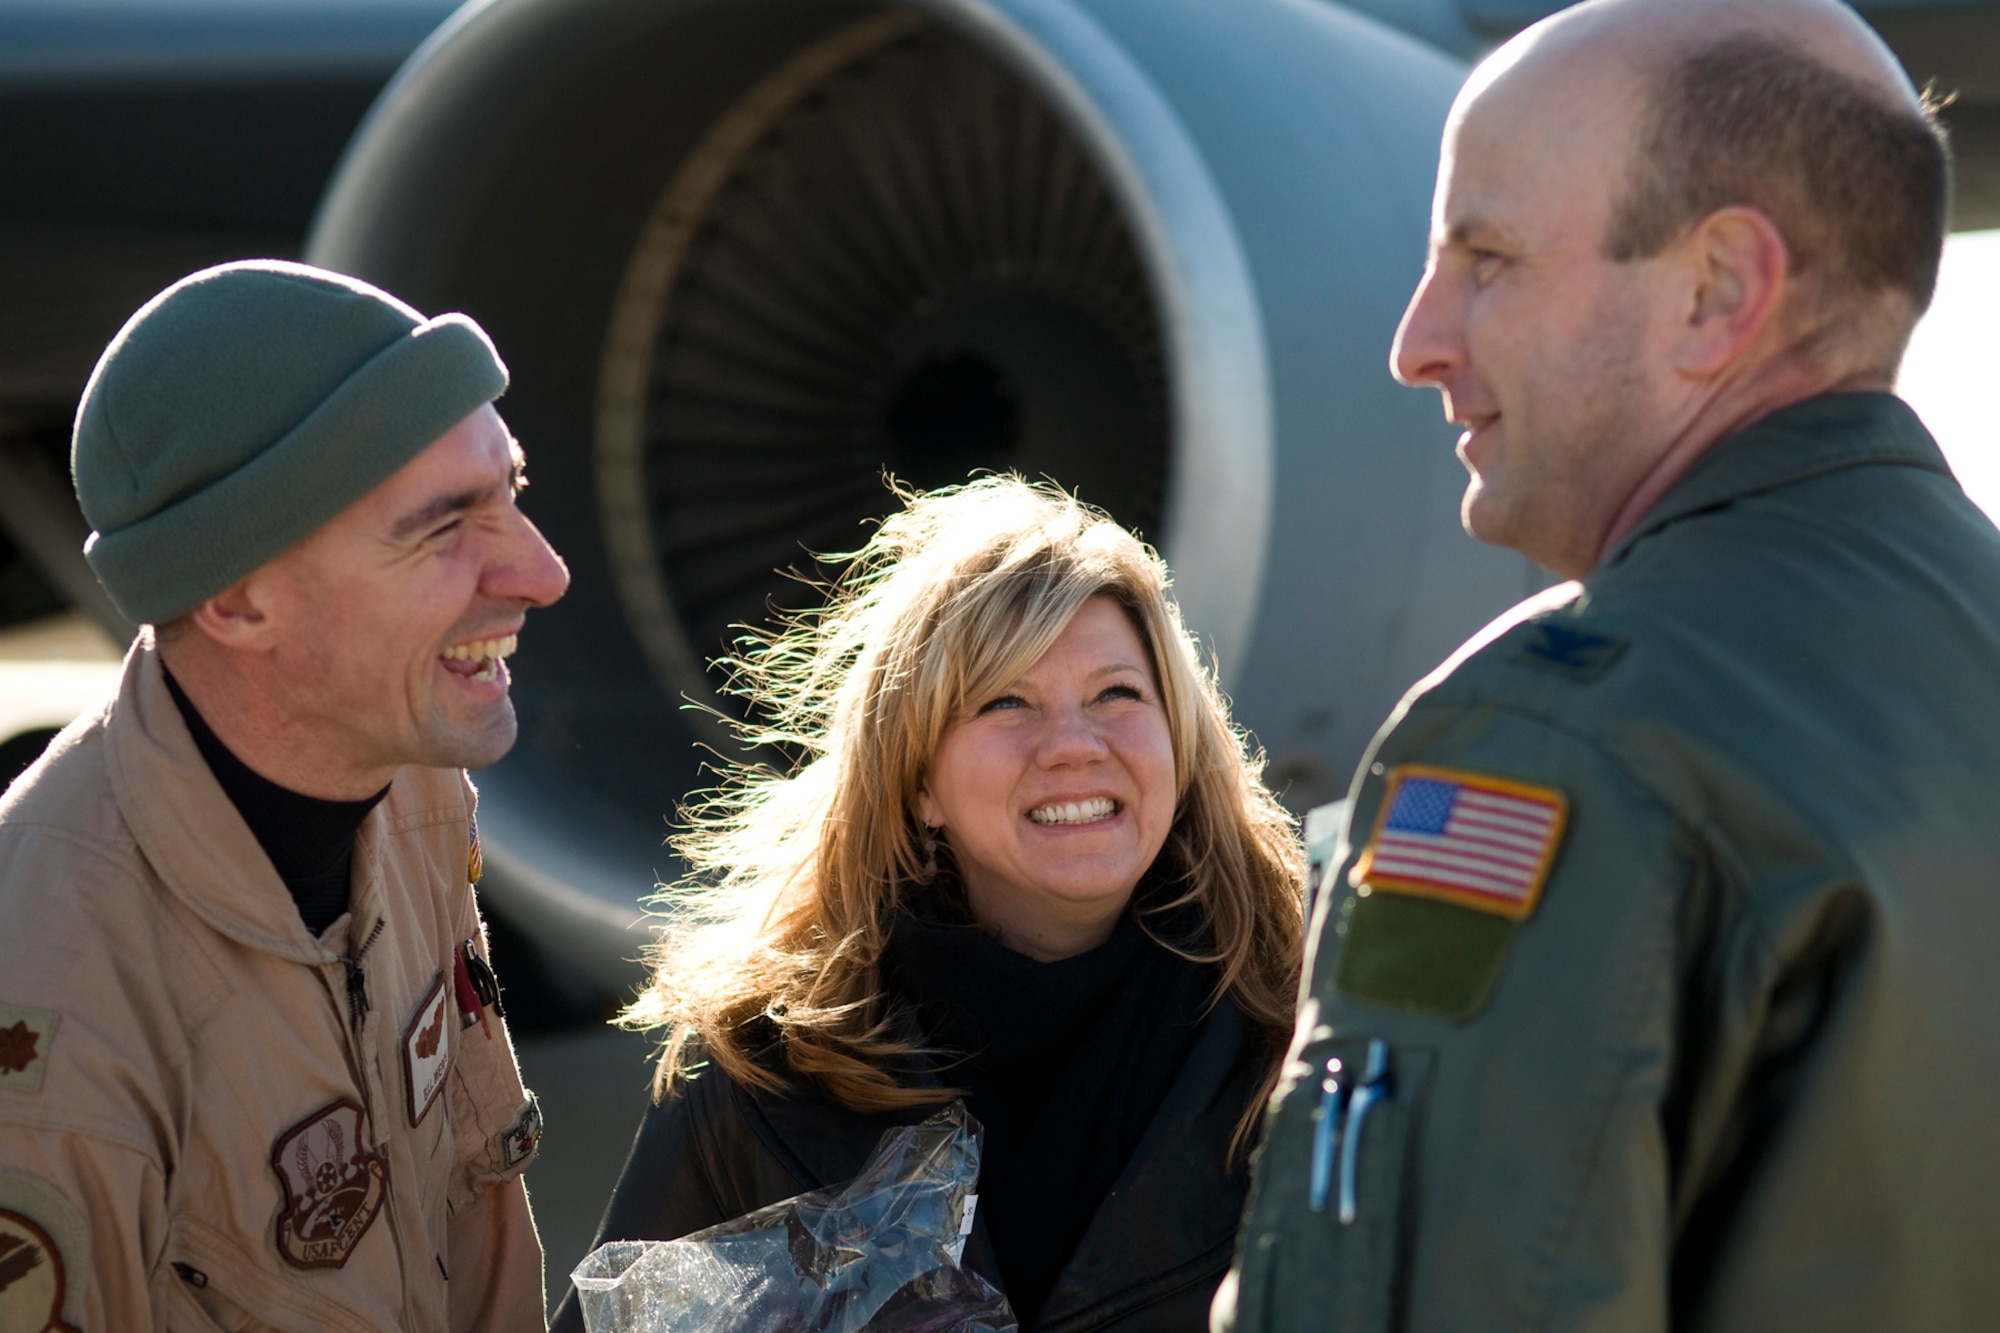 GRISSOM AIR RESERVE BASE, Ind. -- Maj. Billy Werth, left, and his wife Haley talk with Col. Christopher Amend shortly after the major returned from a deployment to Southwest Asia Jan. 5. Werth, who is a KC-135R Stratotanker pilot with the 72nd Air Refueling Squadron, deployed with several other 434th Air Refueling Wing Airmen for over two months in support of Operations Enduing Freedom and Odyssey Dawn. Amend is the 434th Operations Group commander. (U.S. Air Force photo/Tech. Sgt. Mark R. W. Orders-Woempner)
